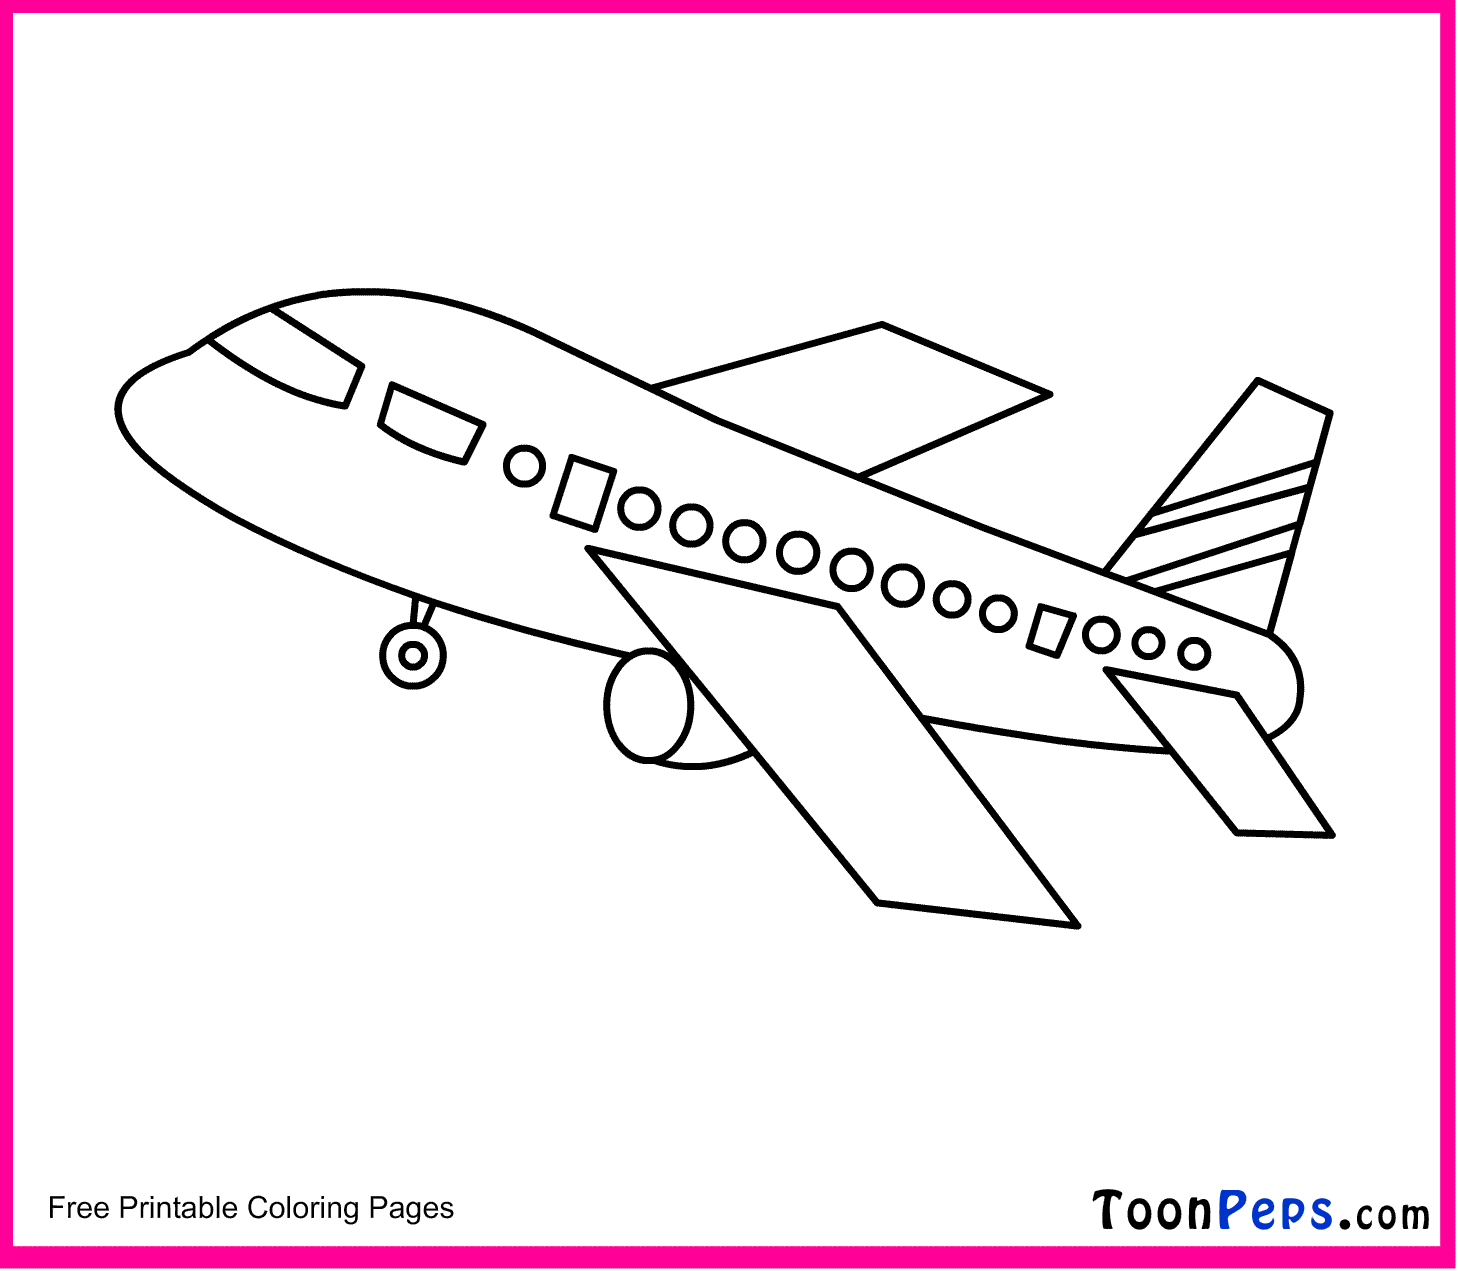 How to Draw a Cartoon Airplane - Really Easy Drawing Tutorial